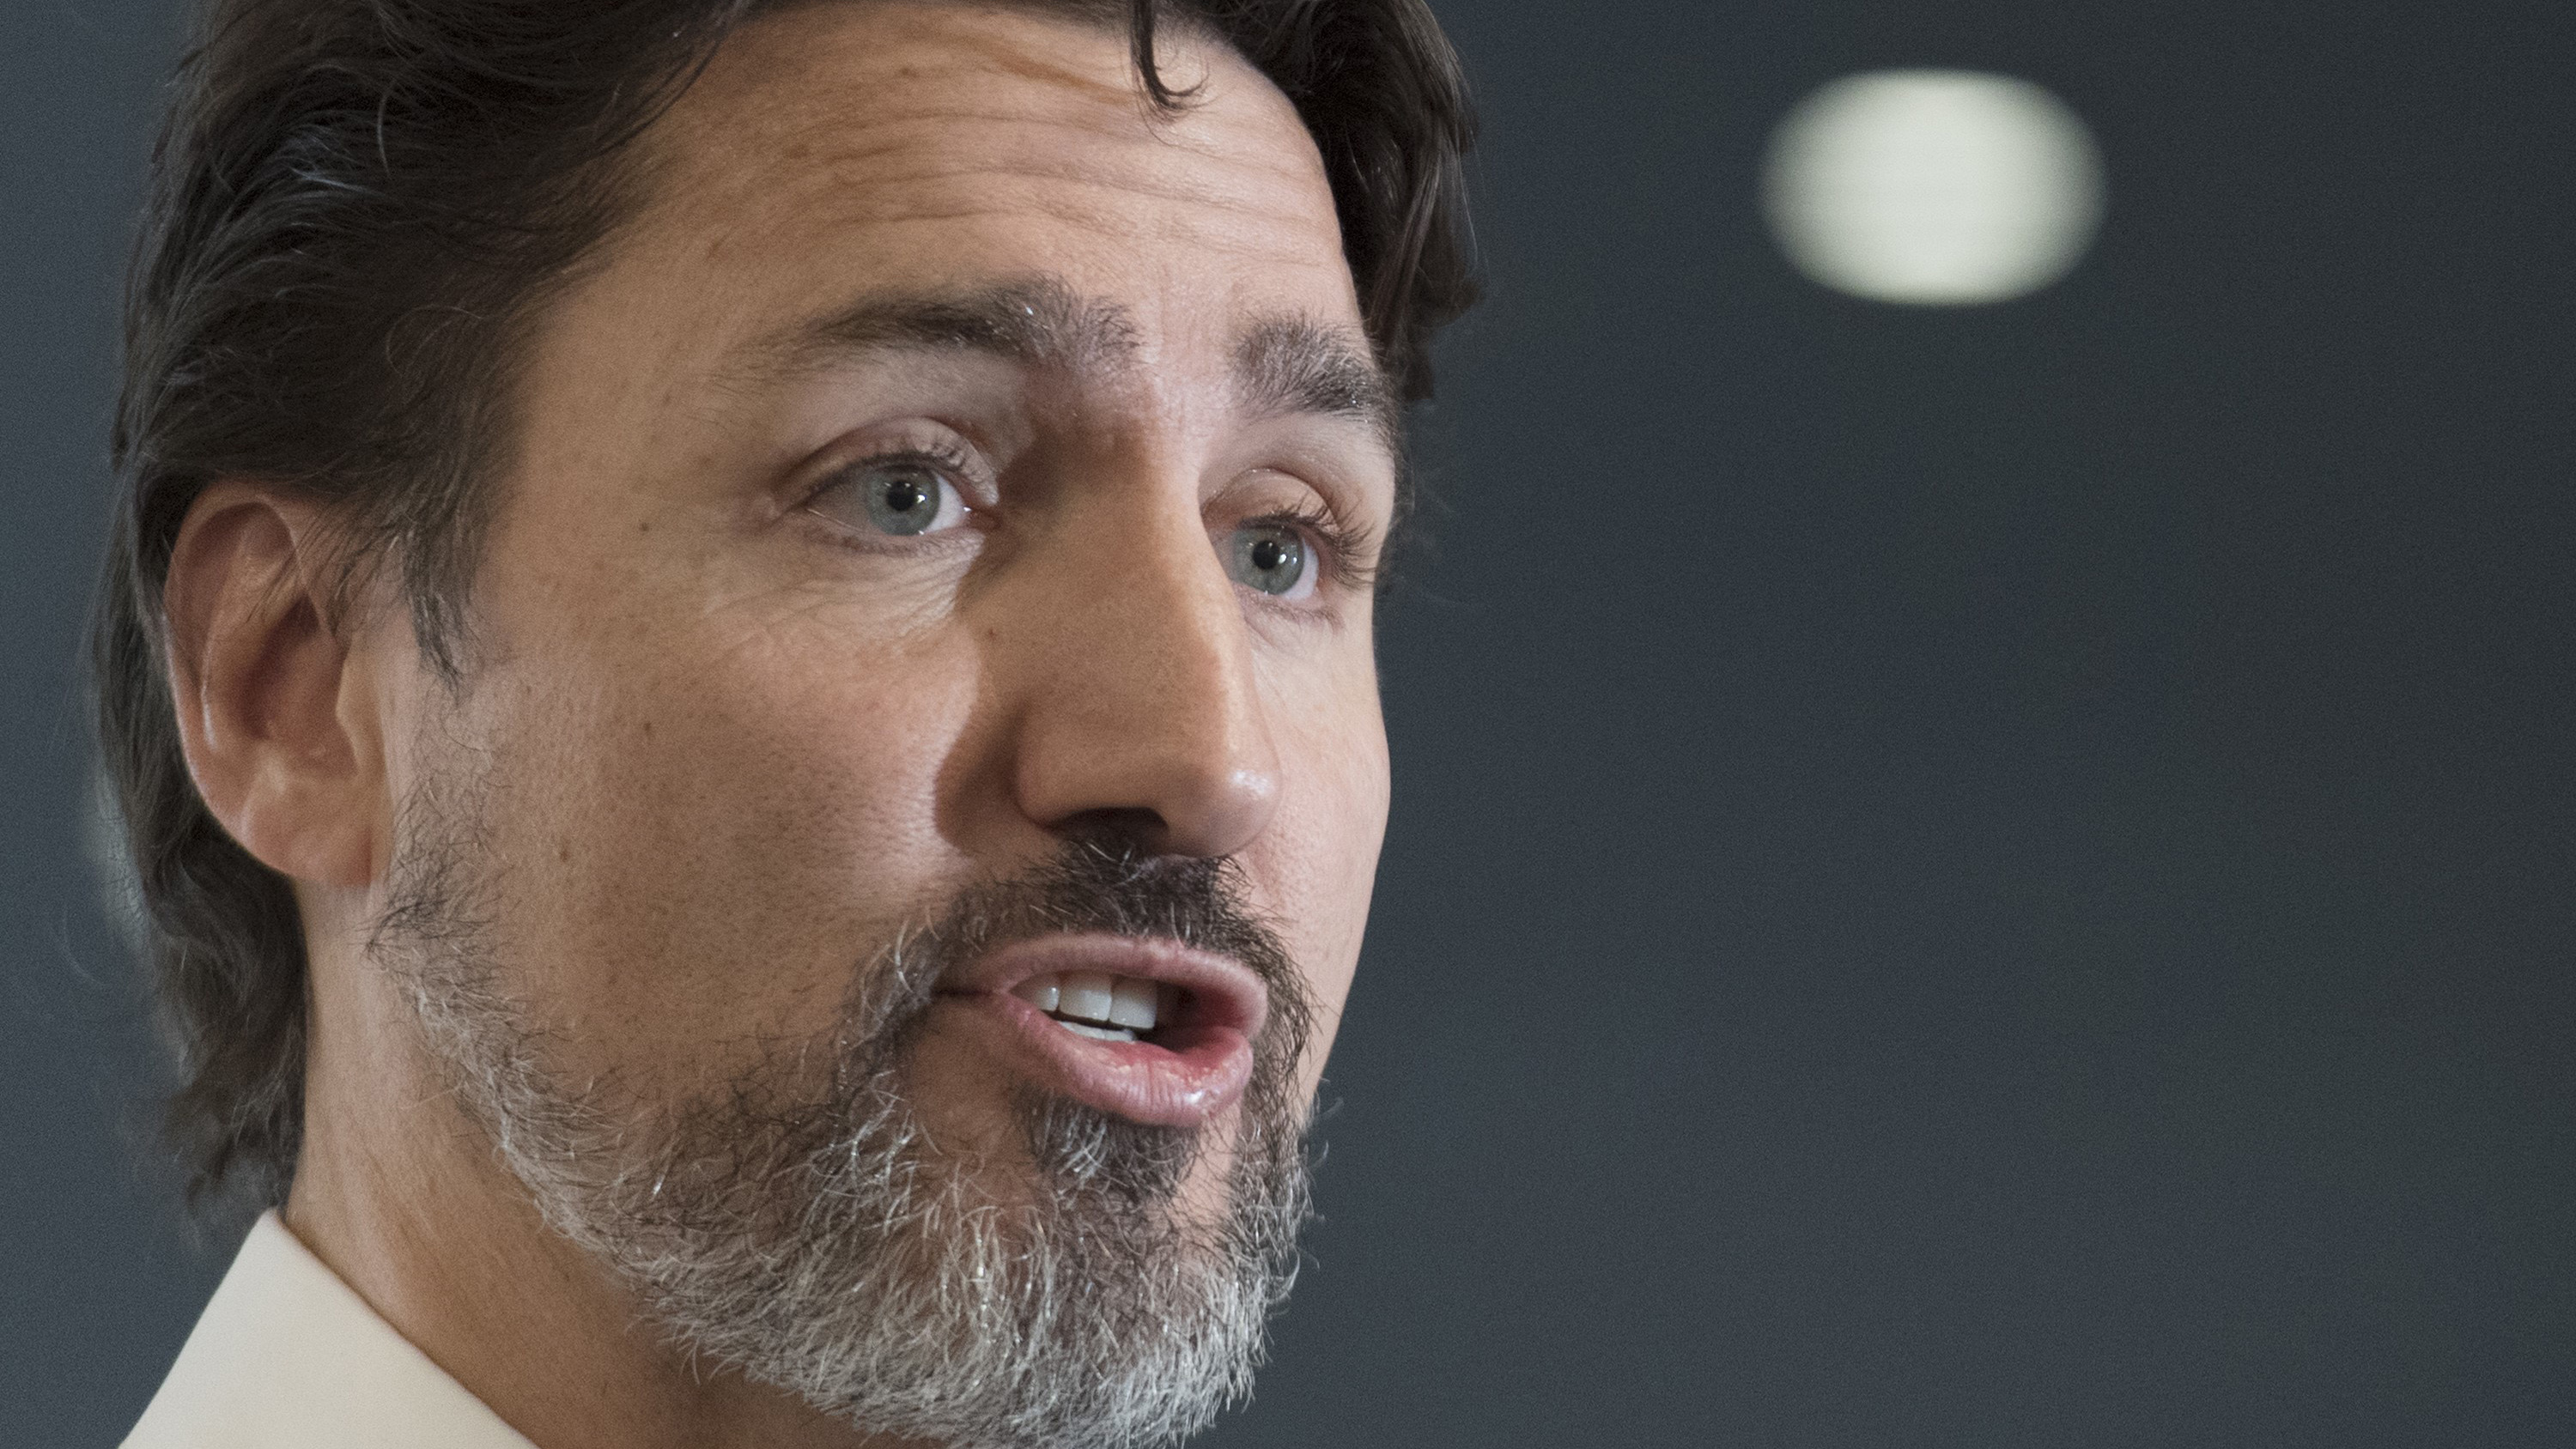 Trudeau 'Deliberate process' underway to get Canadians out of virus